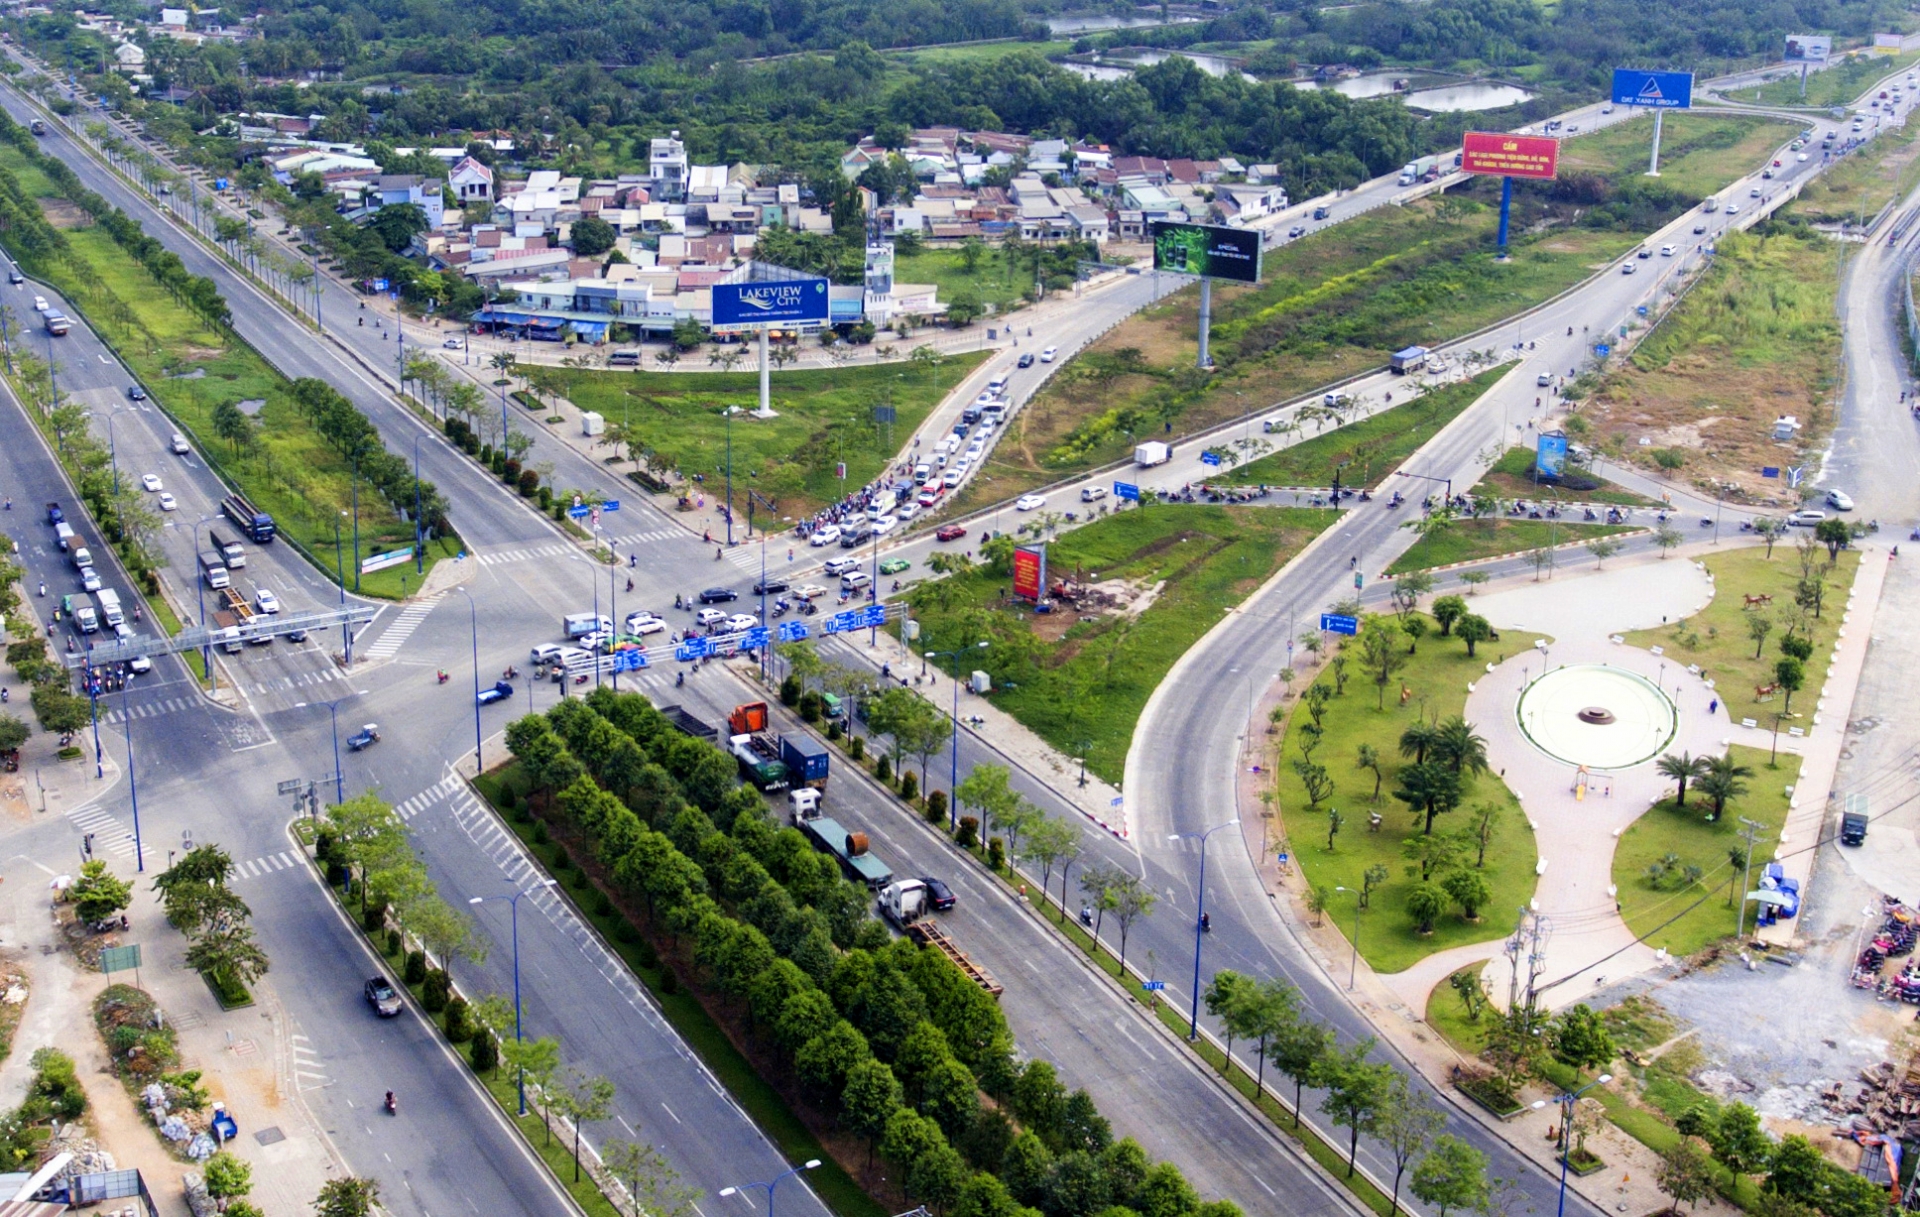 Haiphong looks to implement new major projects